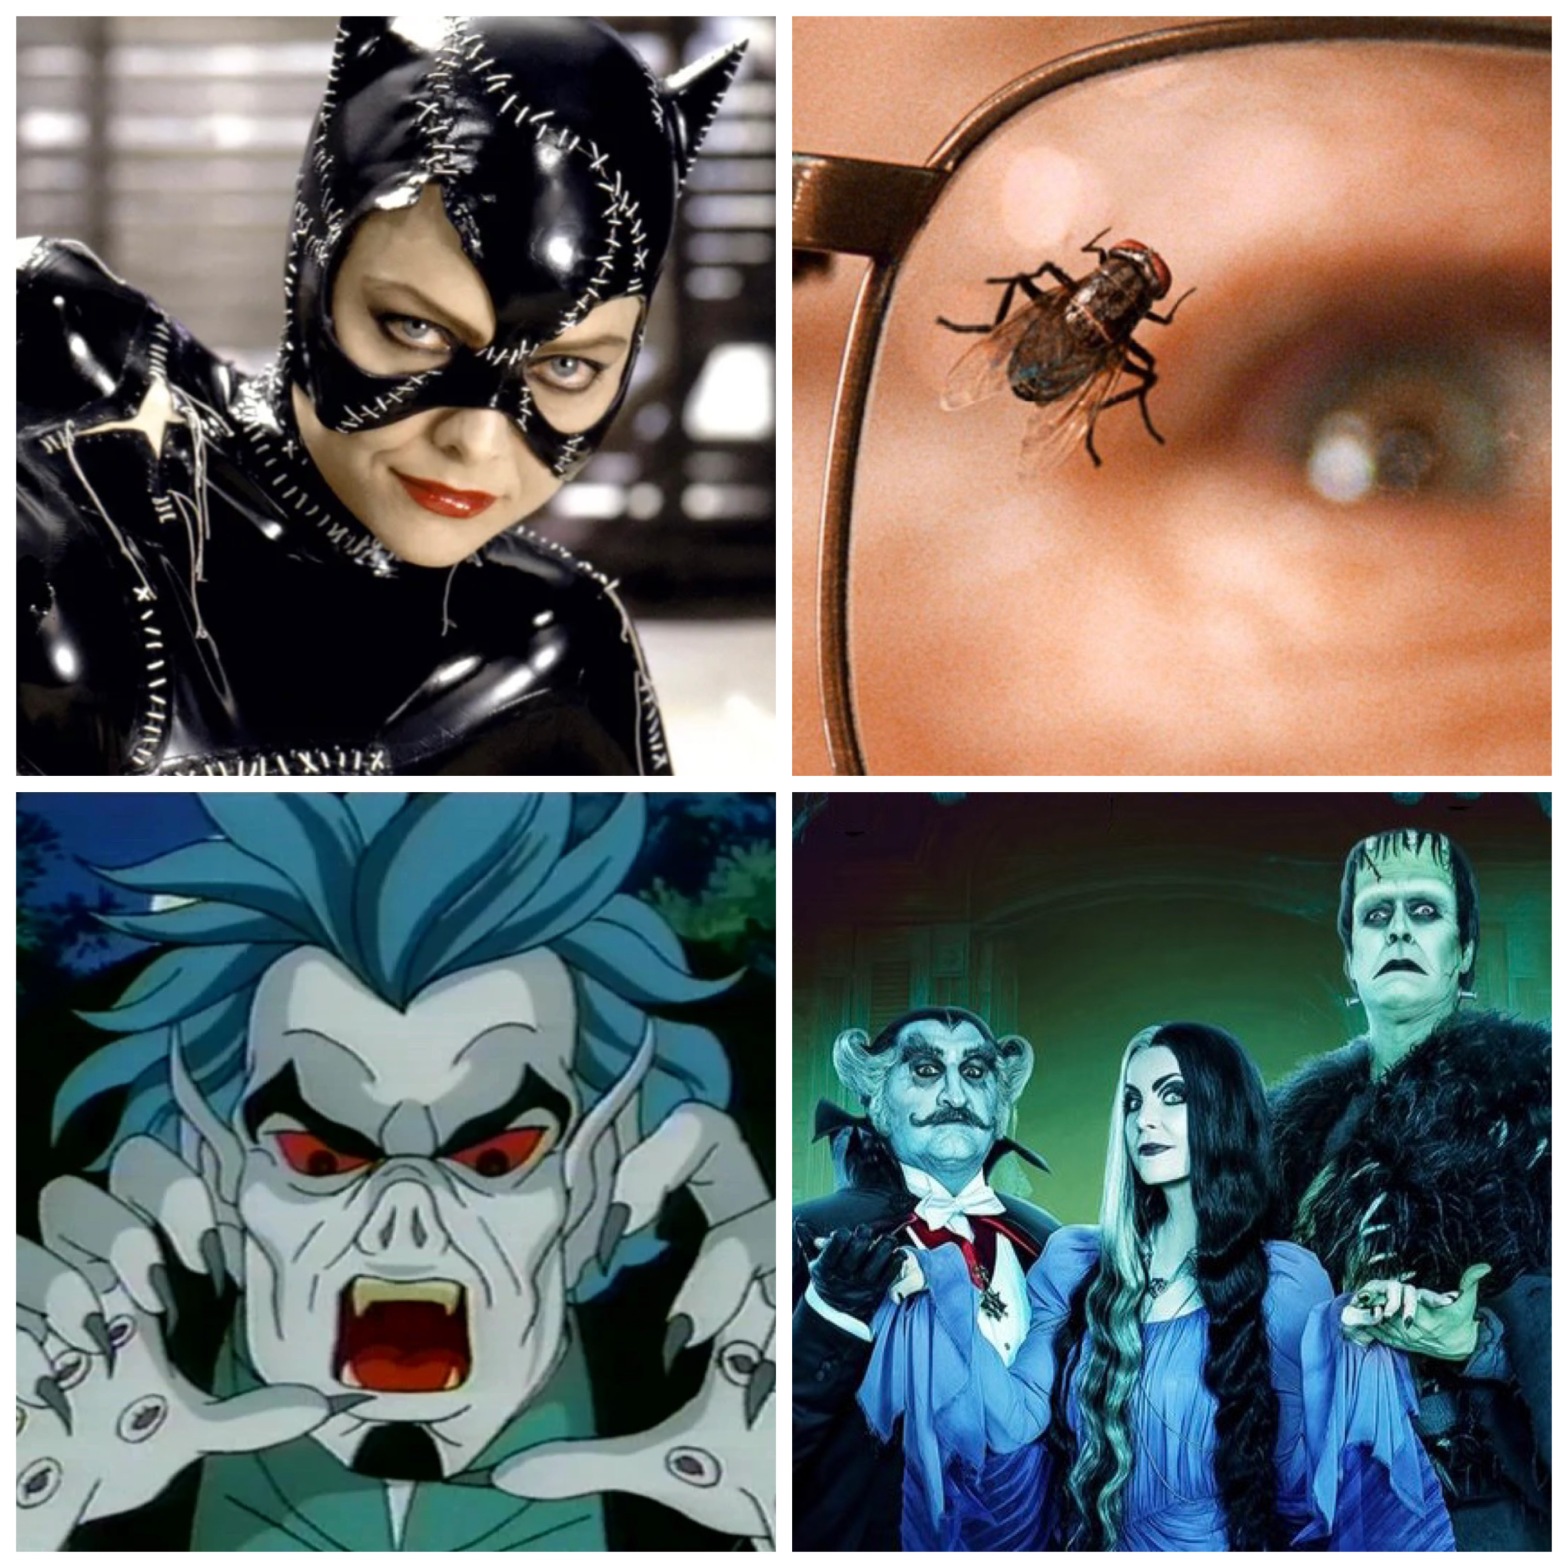 Michelle Pfeiffer's Catwoman, the fly from Breaking Bad, Morbius from Spider-Man: The Animated Series, and Rob Zombie's The Munsters.